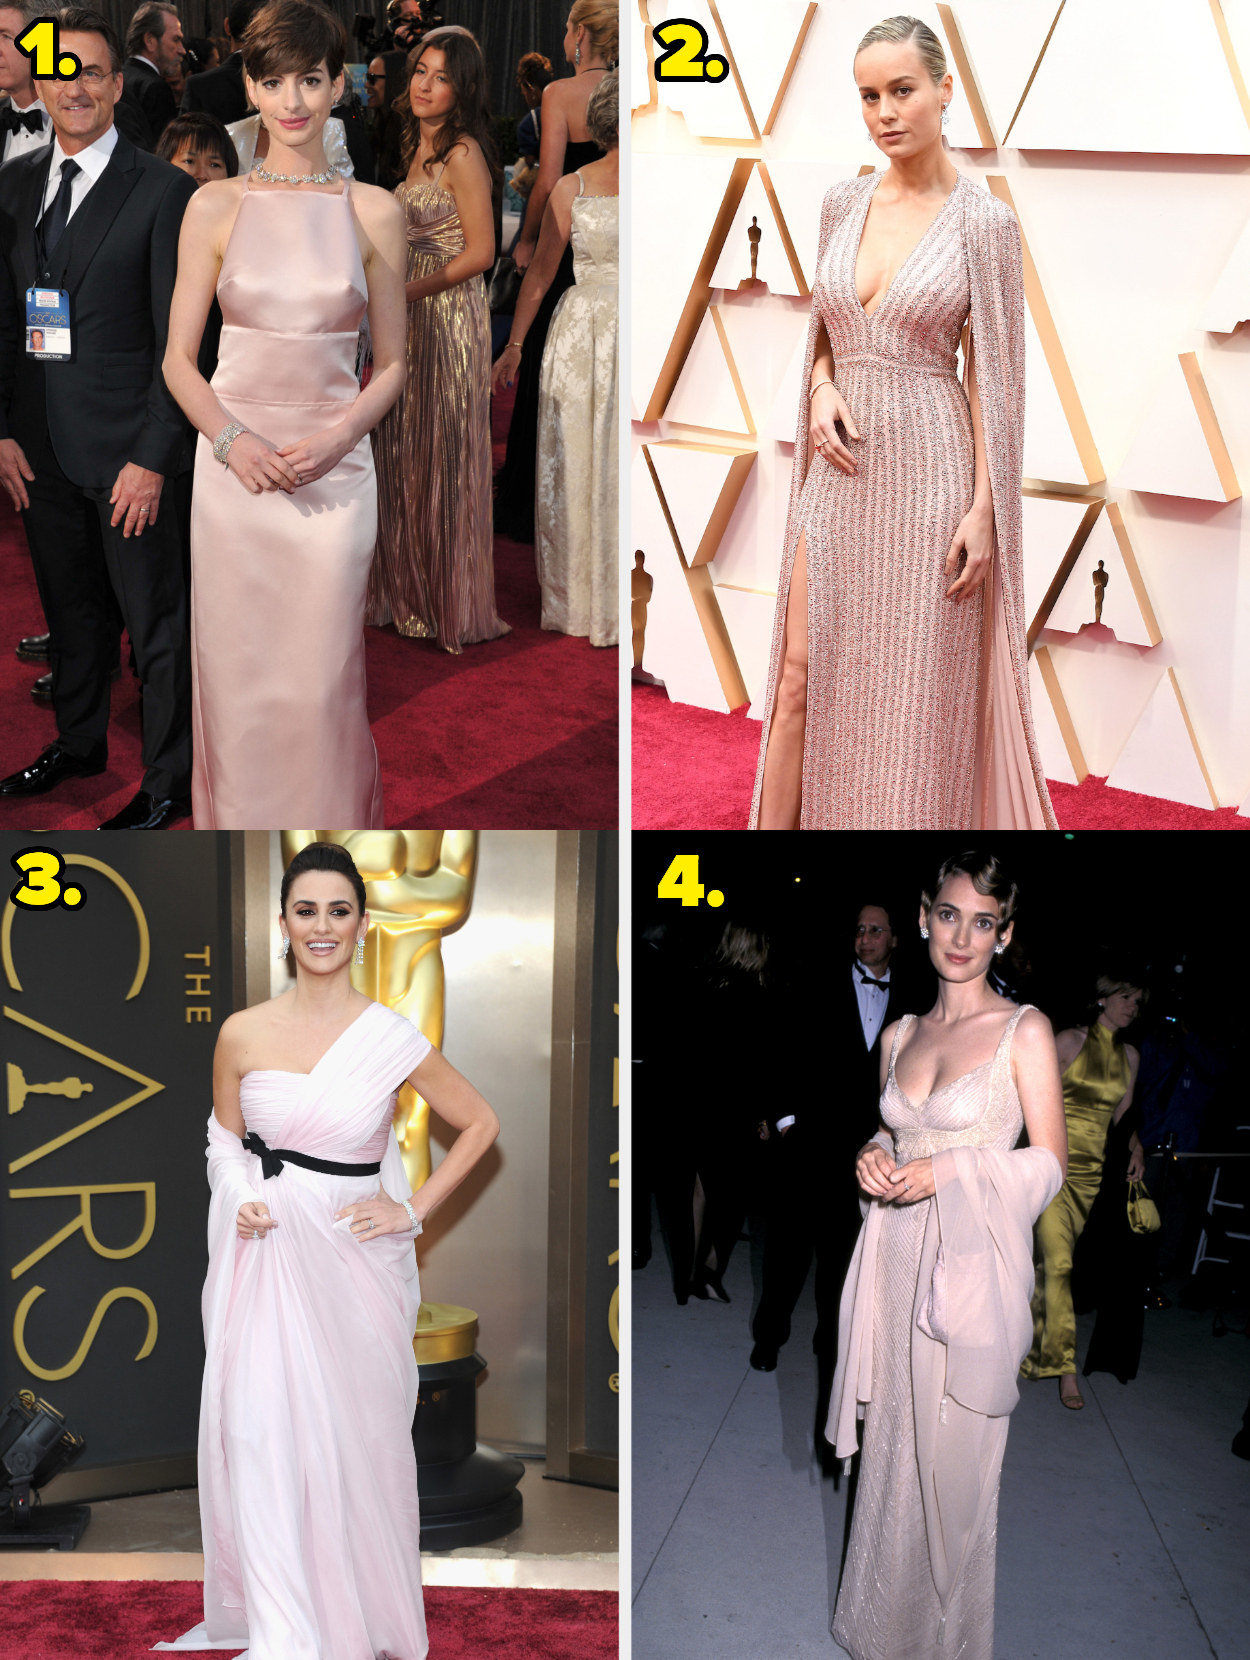 1. Anne Hathaway wears a sleek haltergown. 2. Brie Larson wears a deep v-neck gown with a cape. 3. Penelope Cruz wears a one shouldered gown with a bow tied at the waist. 4. Winona Ryder wears a 1920s inspired gown.